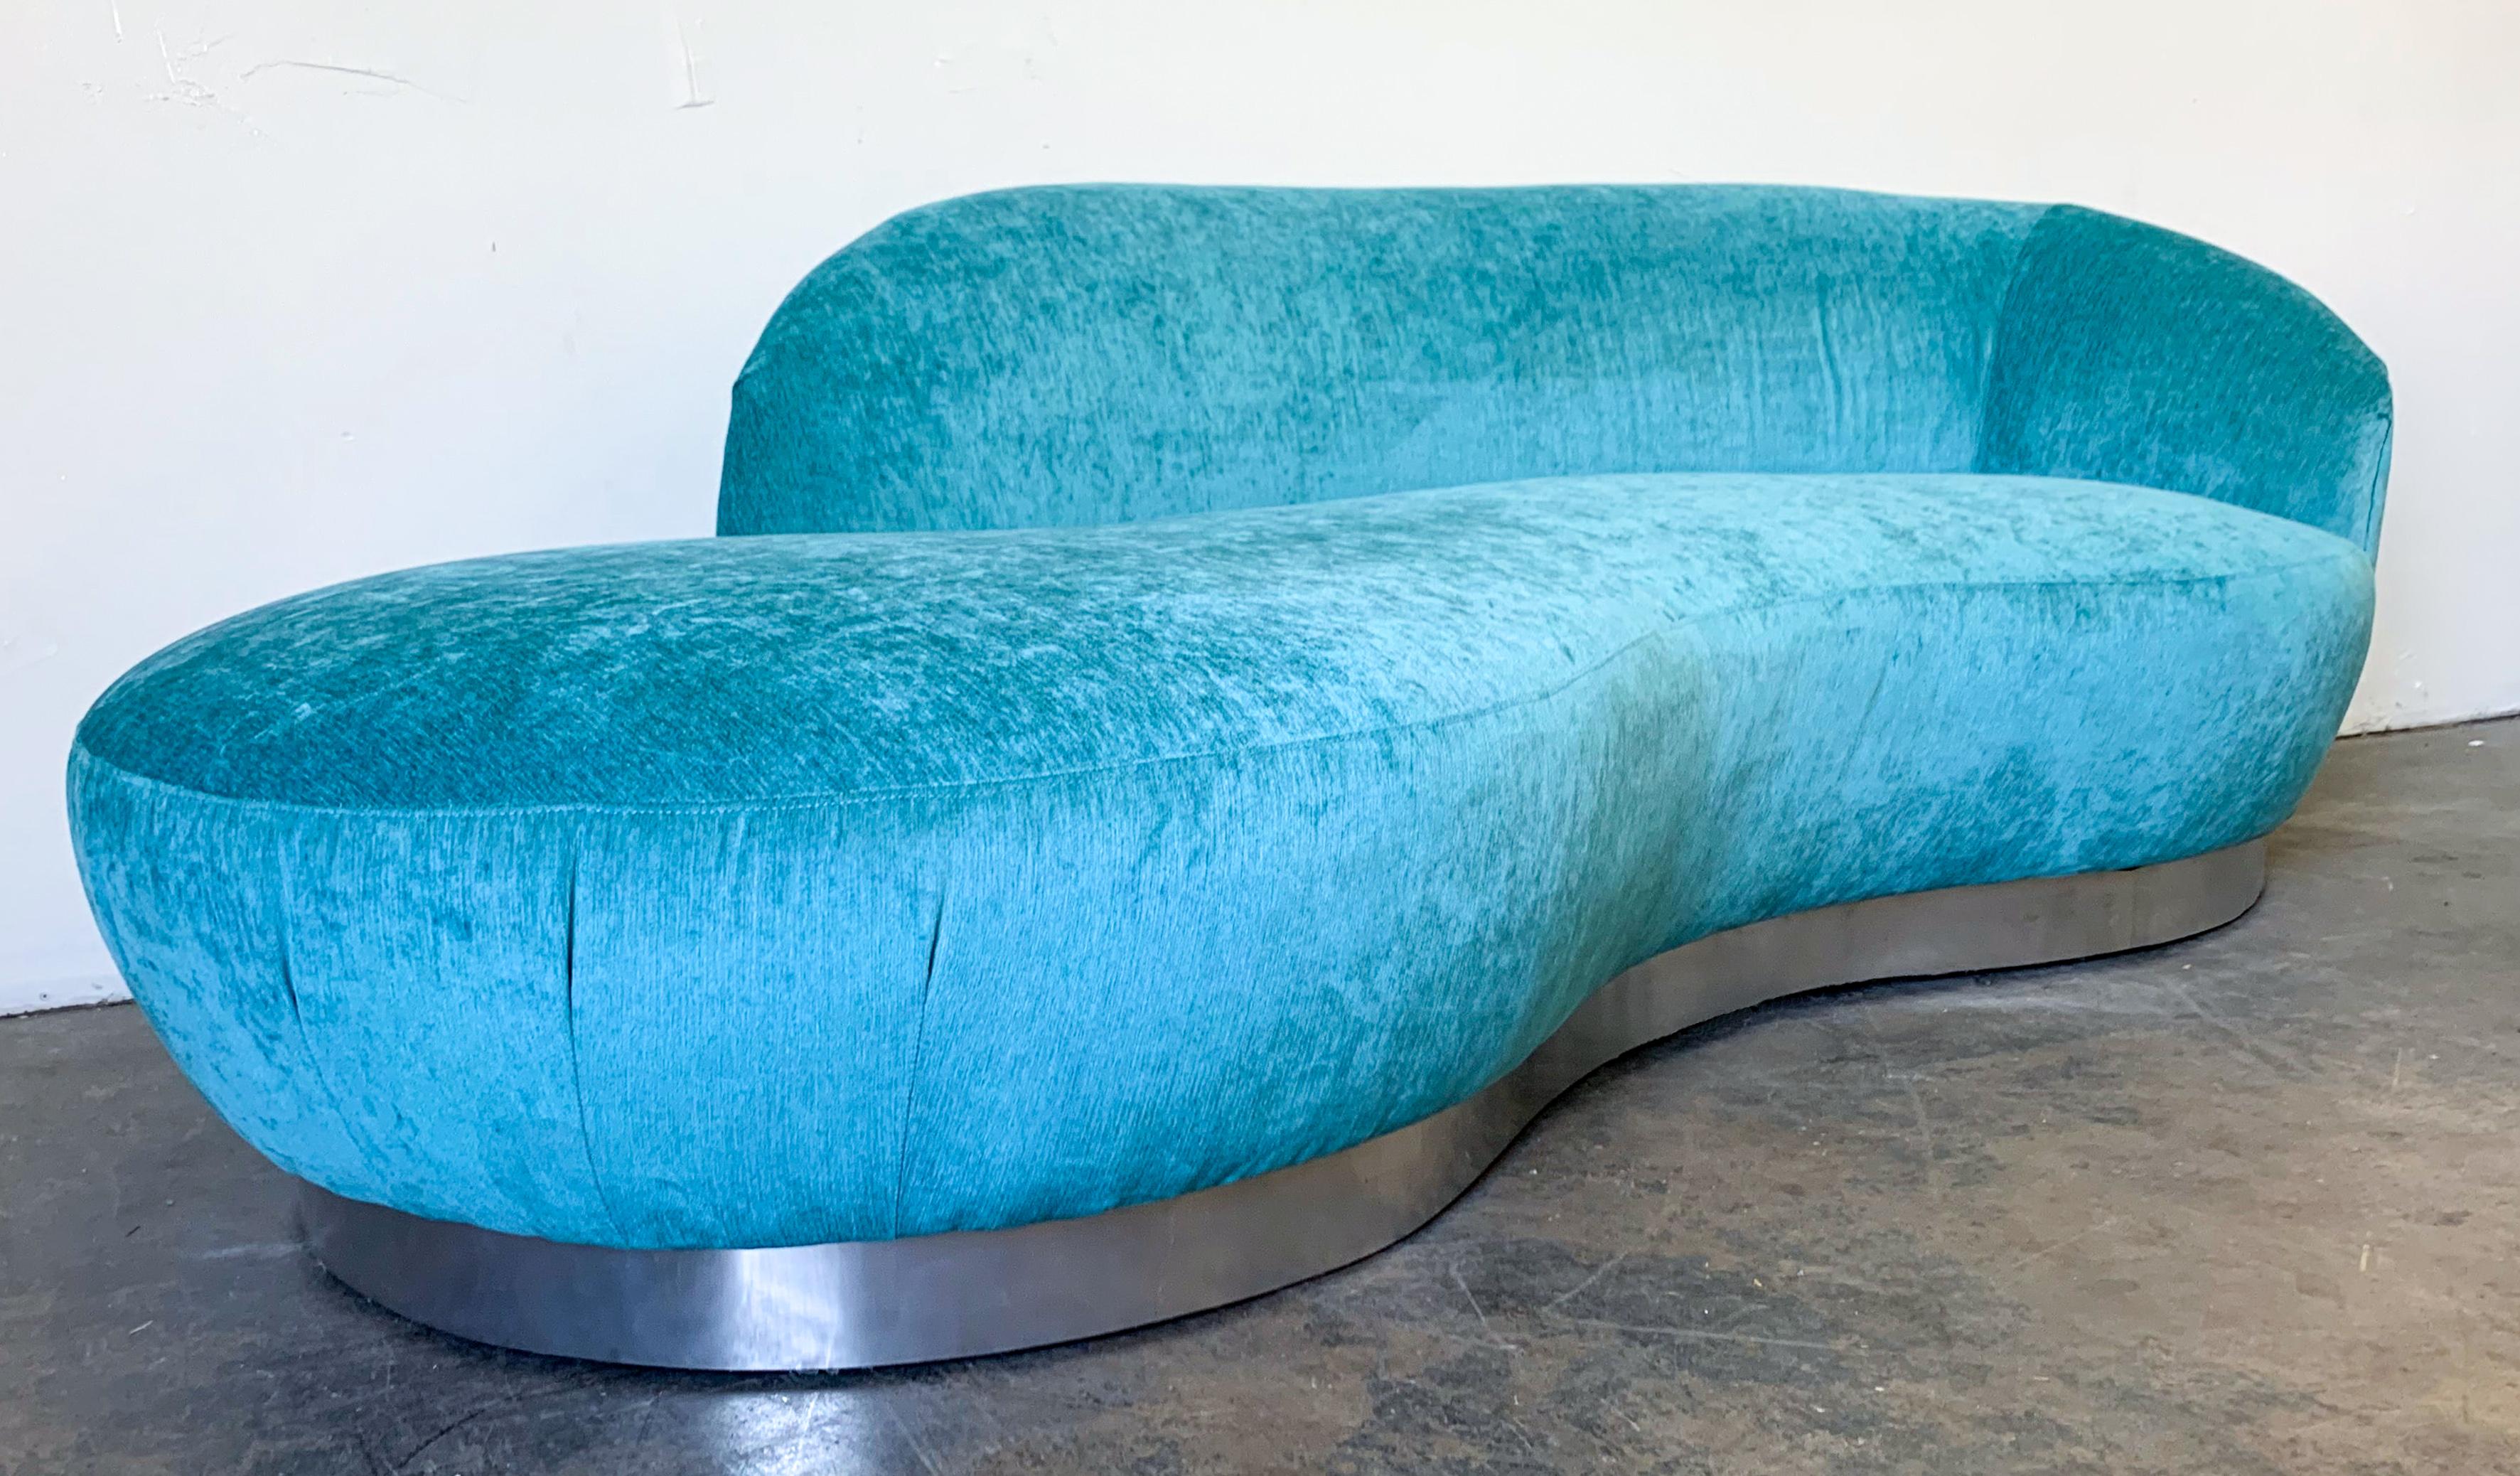 This sofa is absolutely stunning! This serpentine sofa is clad in a gorgeous turquoise chenille and features a bold chrome plinth base. This stunning jewel toned sofa is sure to make a statement in any environment and would look excellent in a